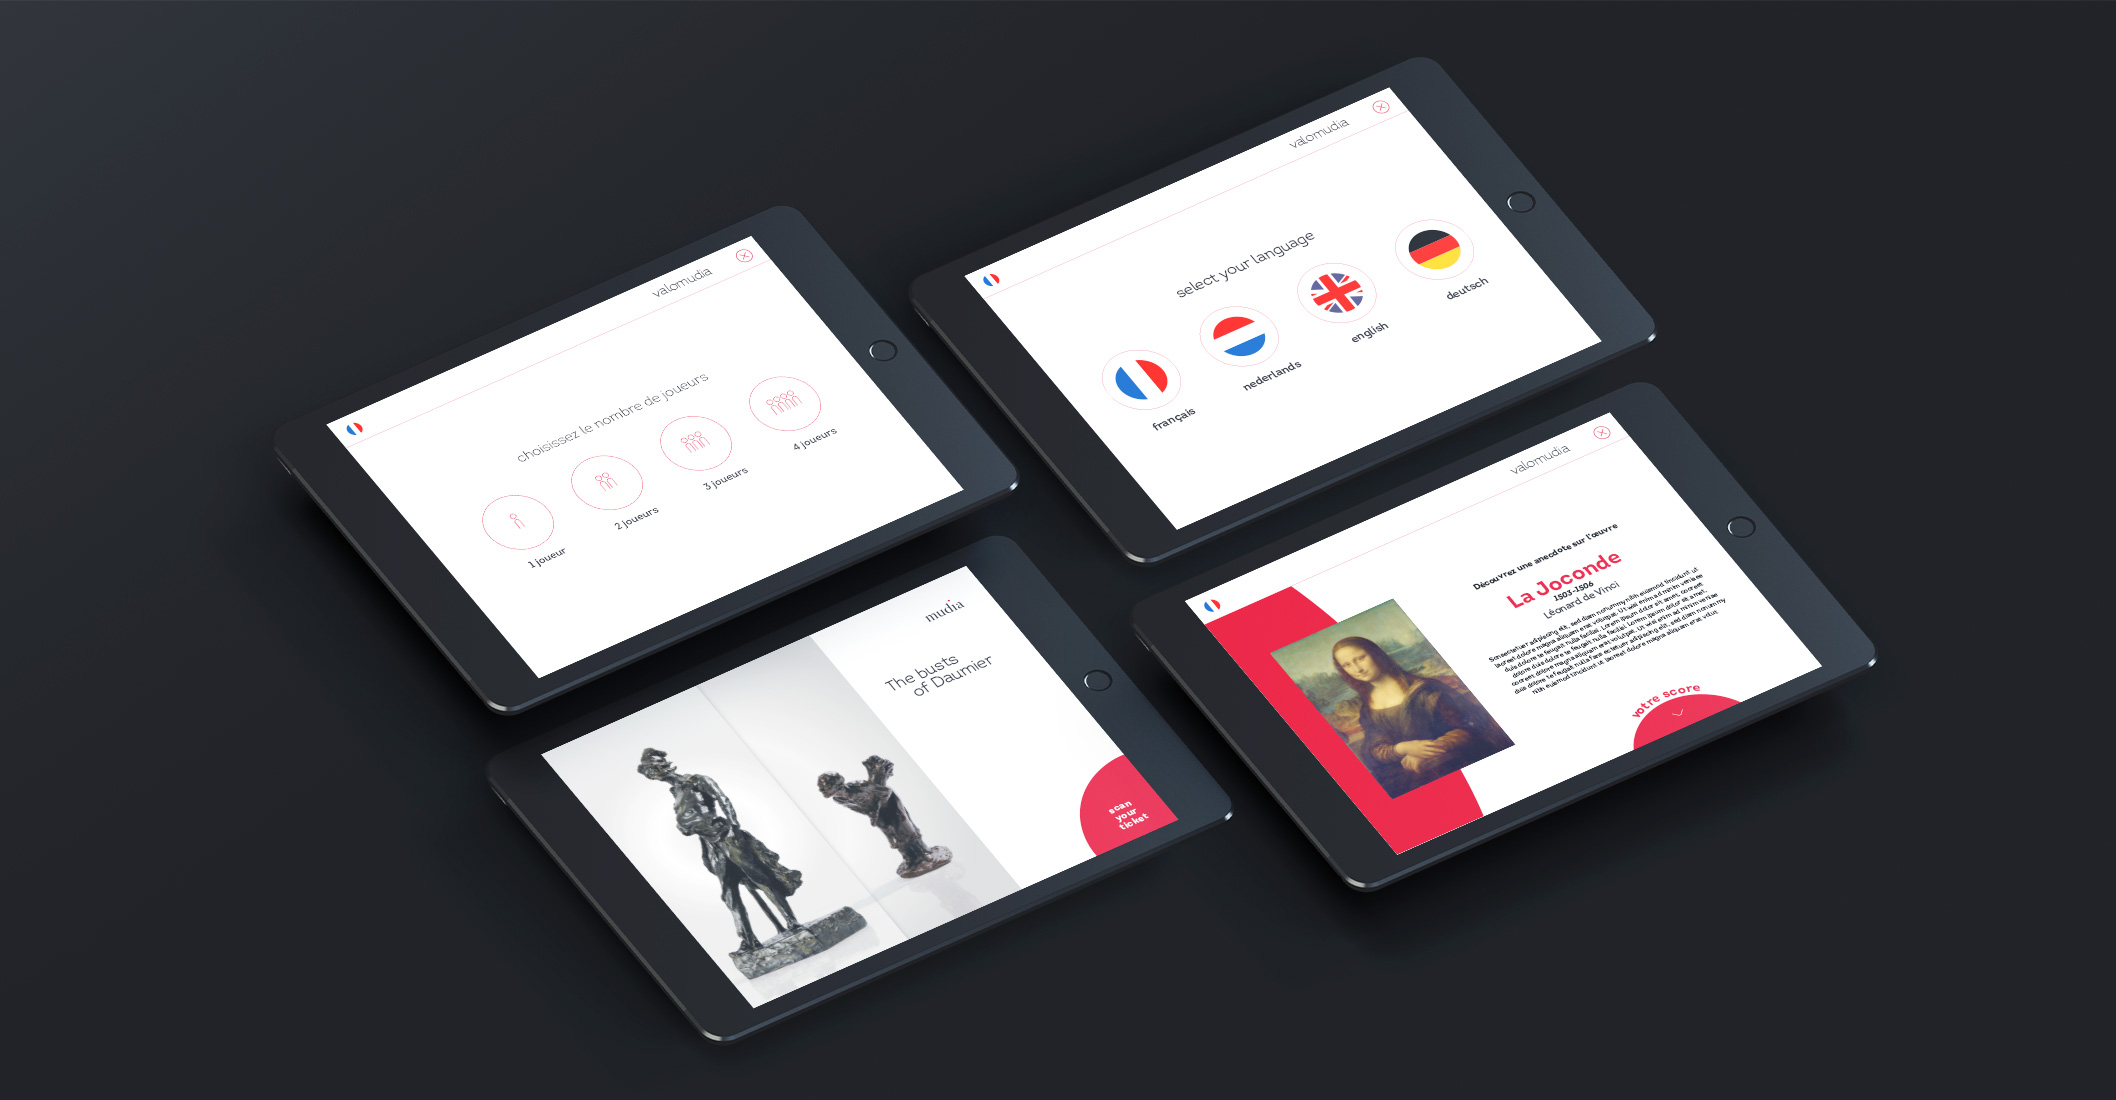 Branding for digital applications for a museum